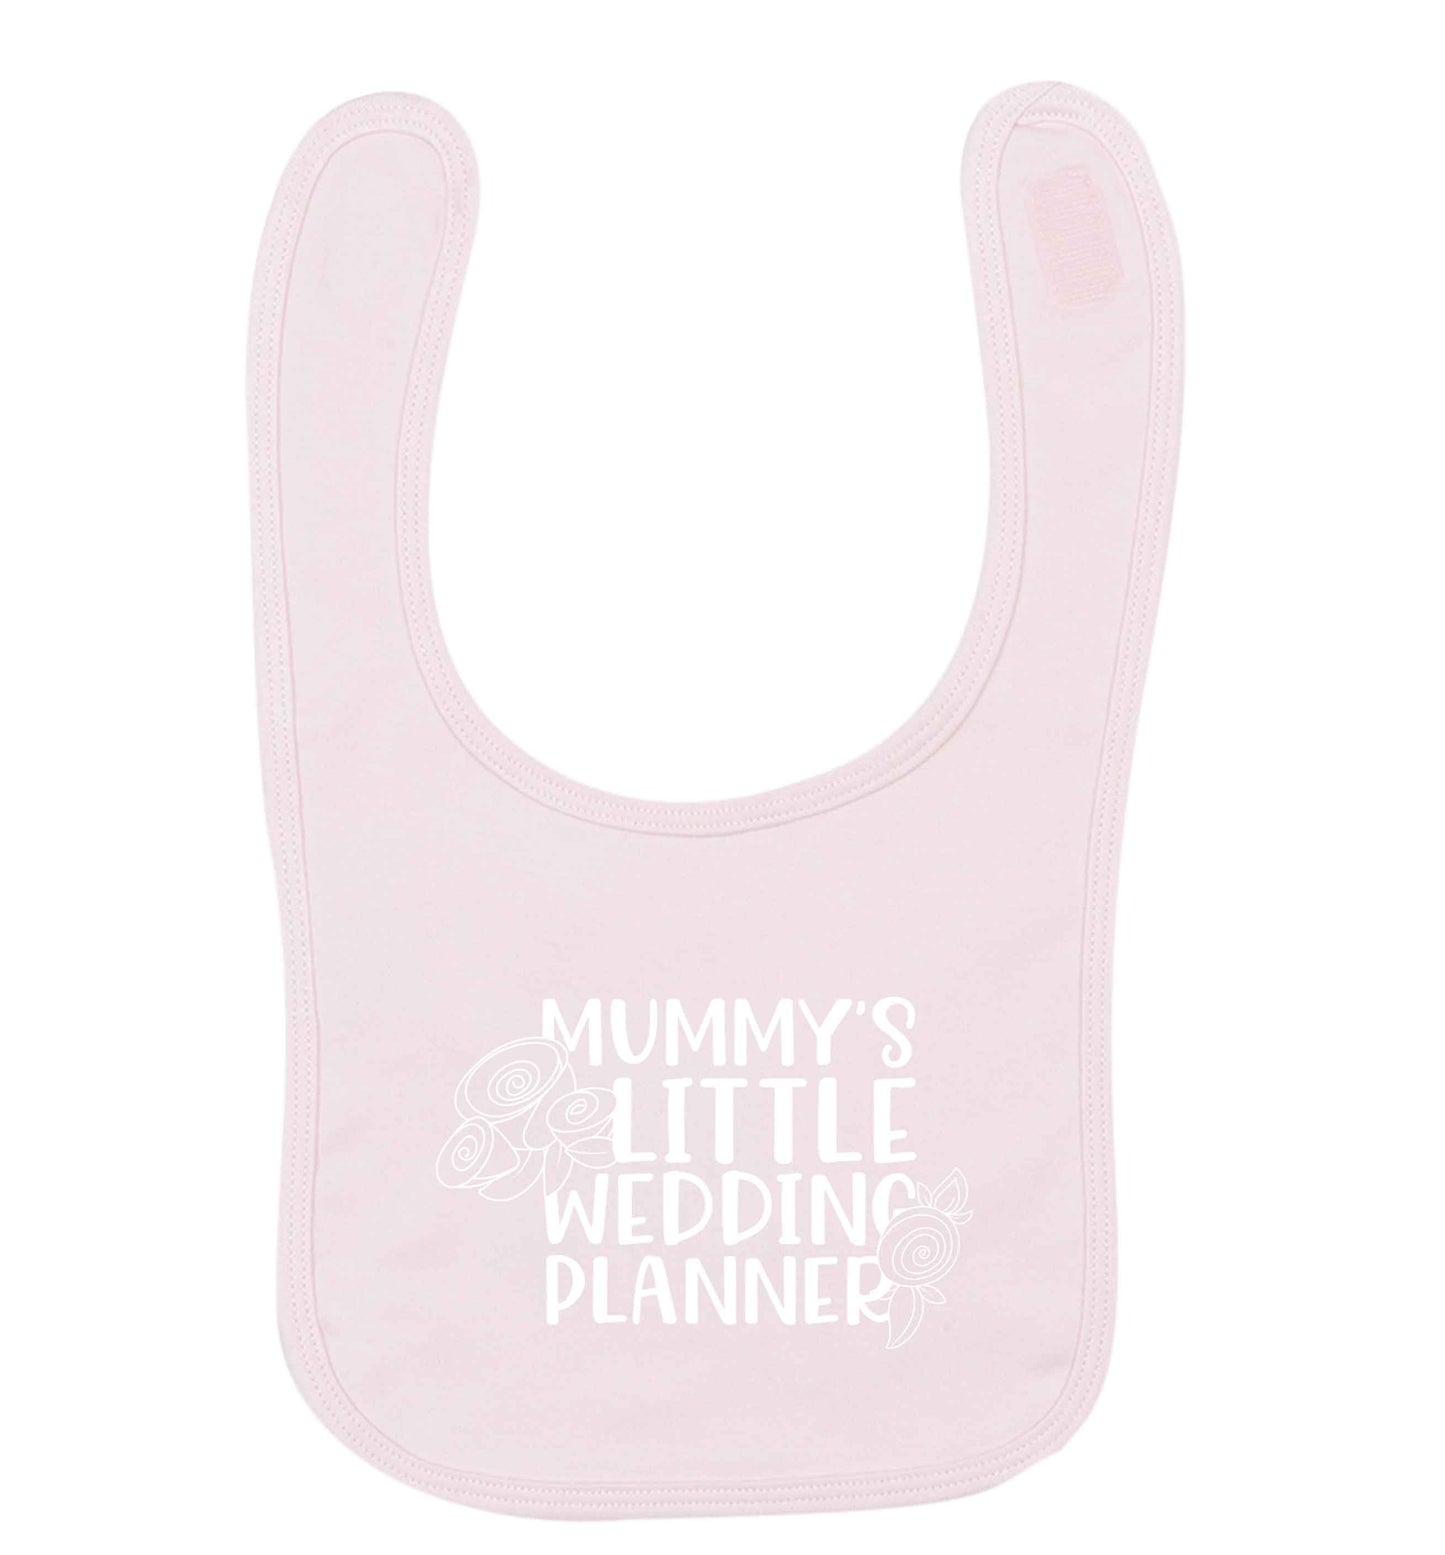 adorable wedding themed gifts for your mini wedding planner! pale pink baby bib